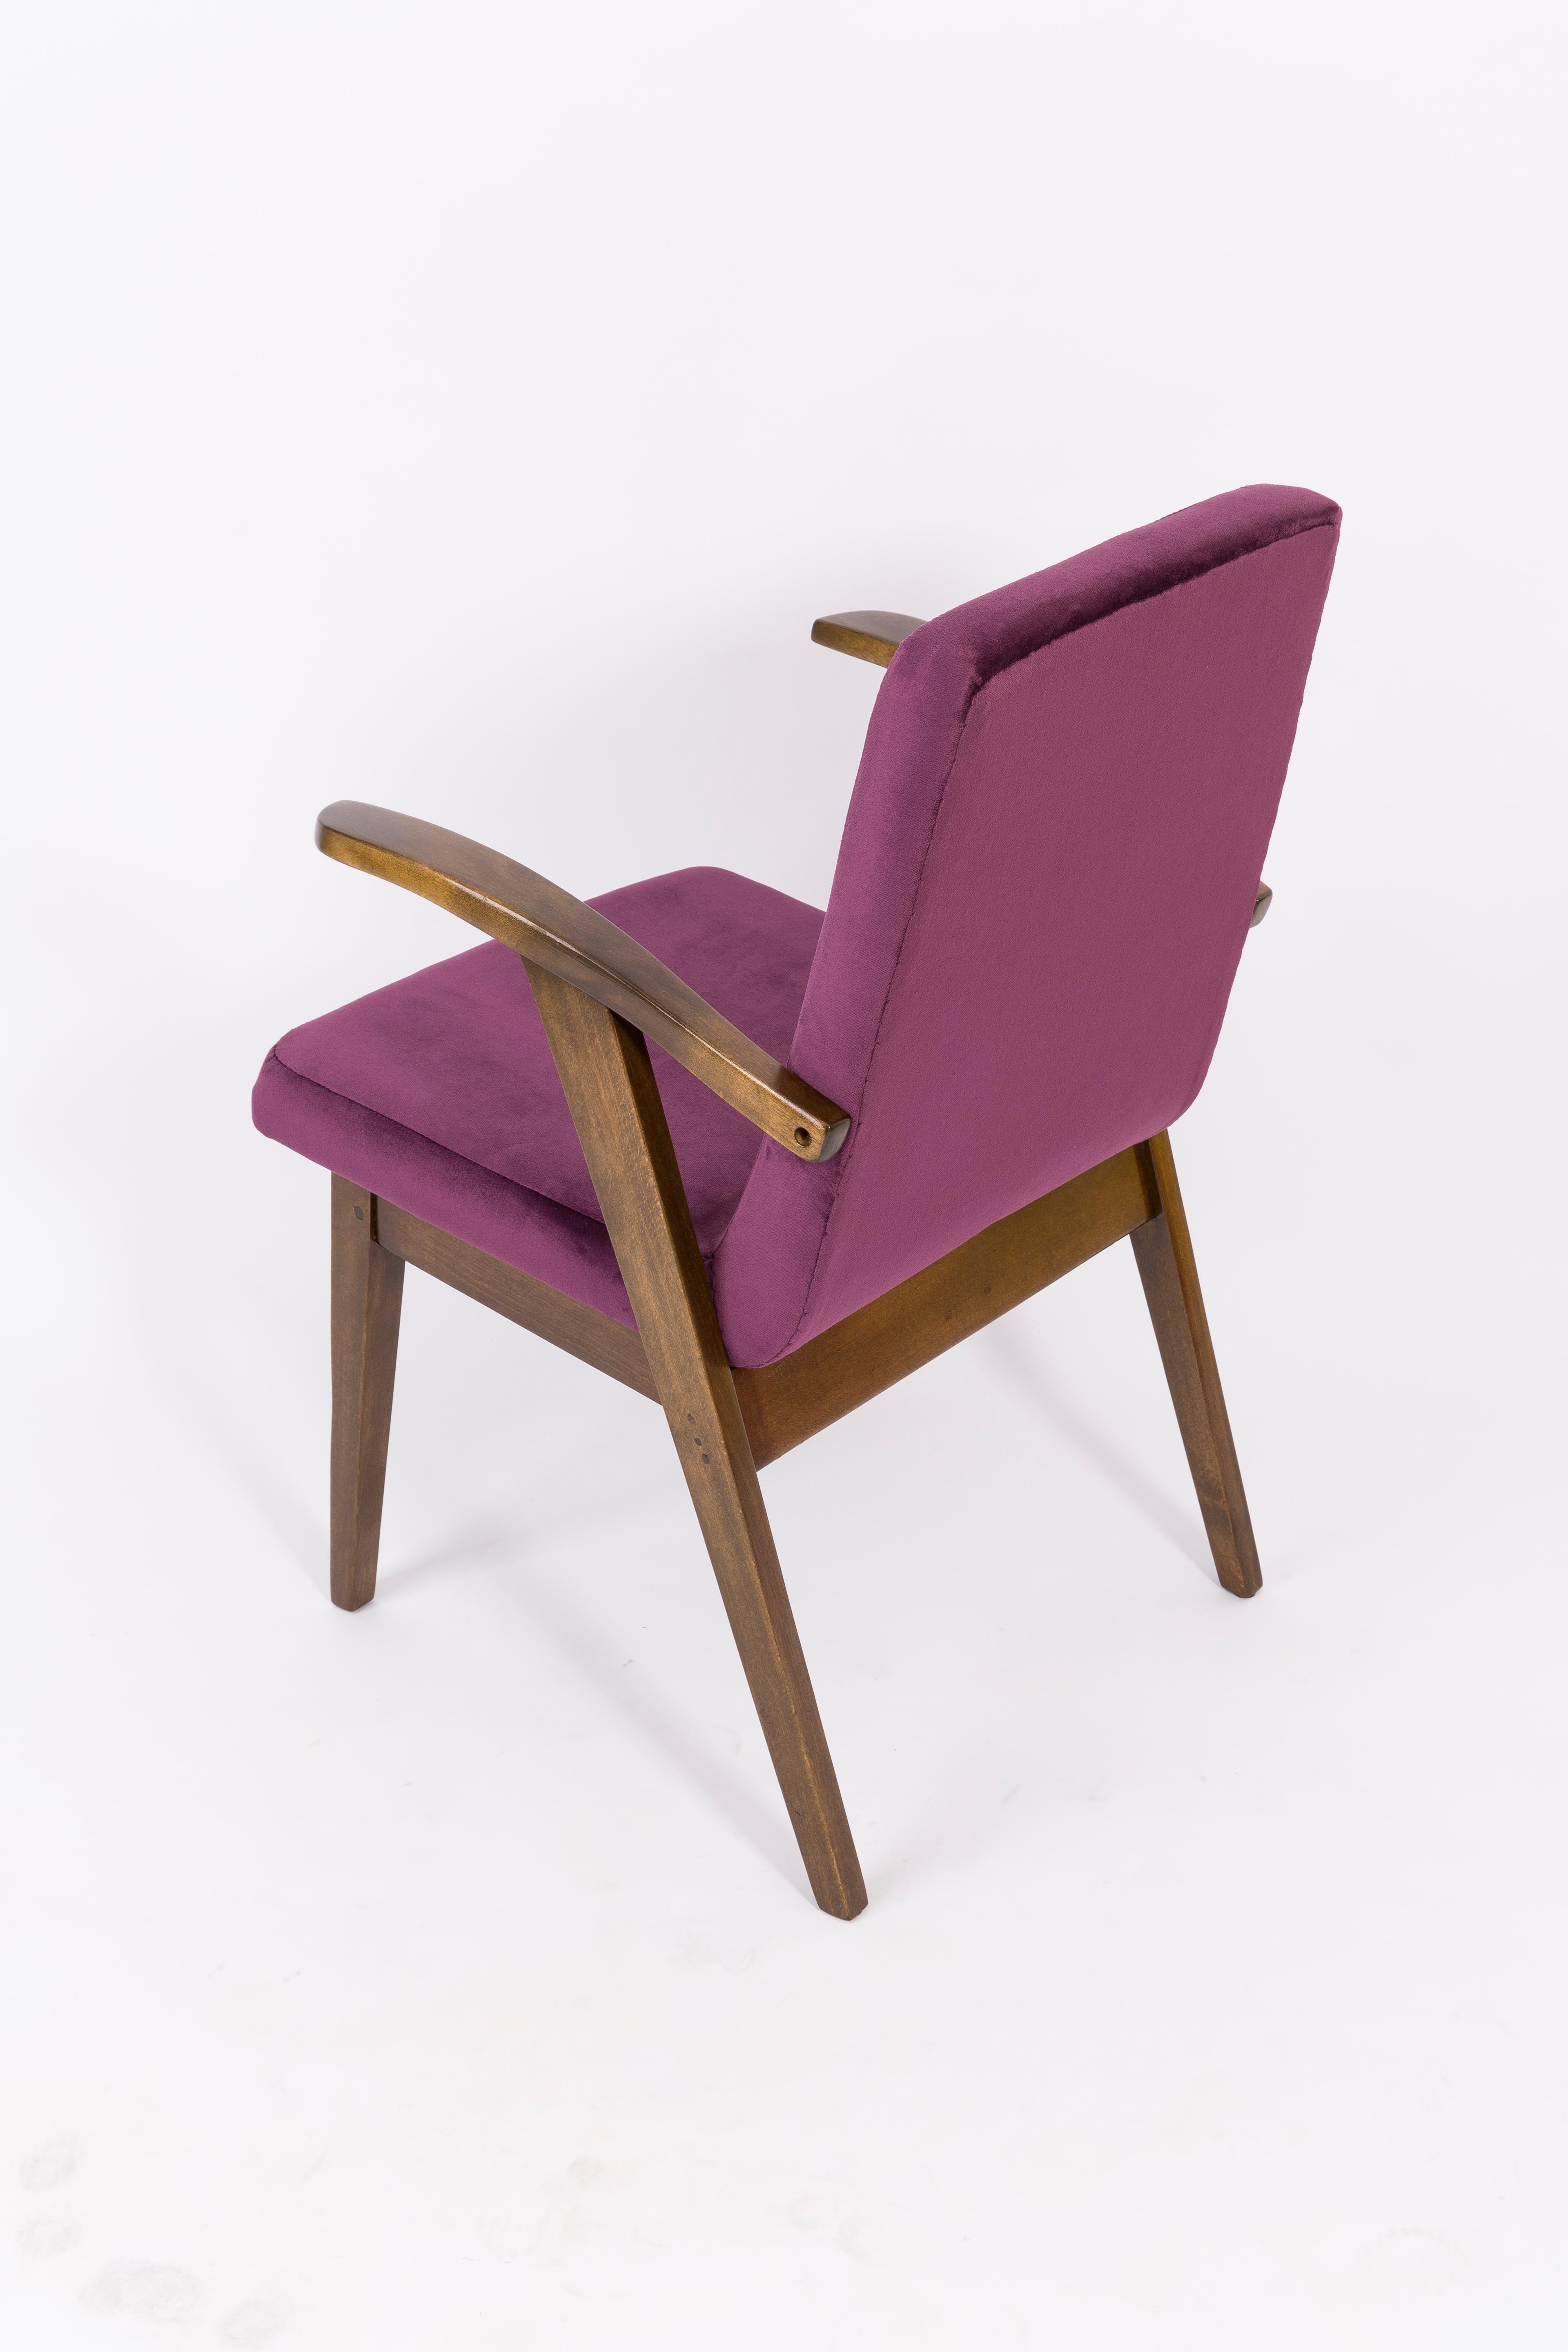 Hand-Crafted Set of Two 20th Century Vintage Plum Violet Armchair by Mieczyslaw Puchala 1960s For Sale